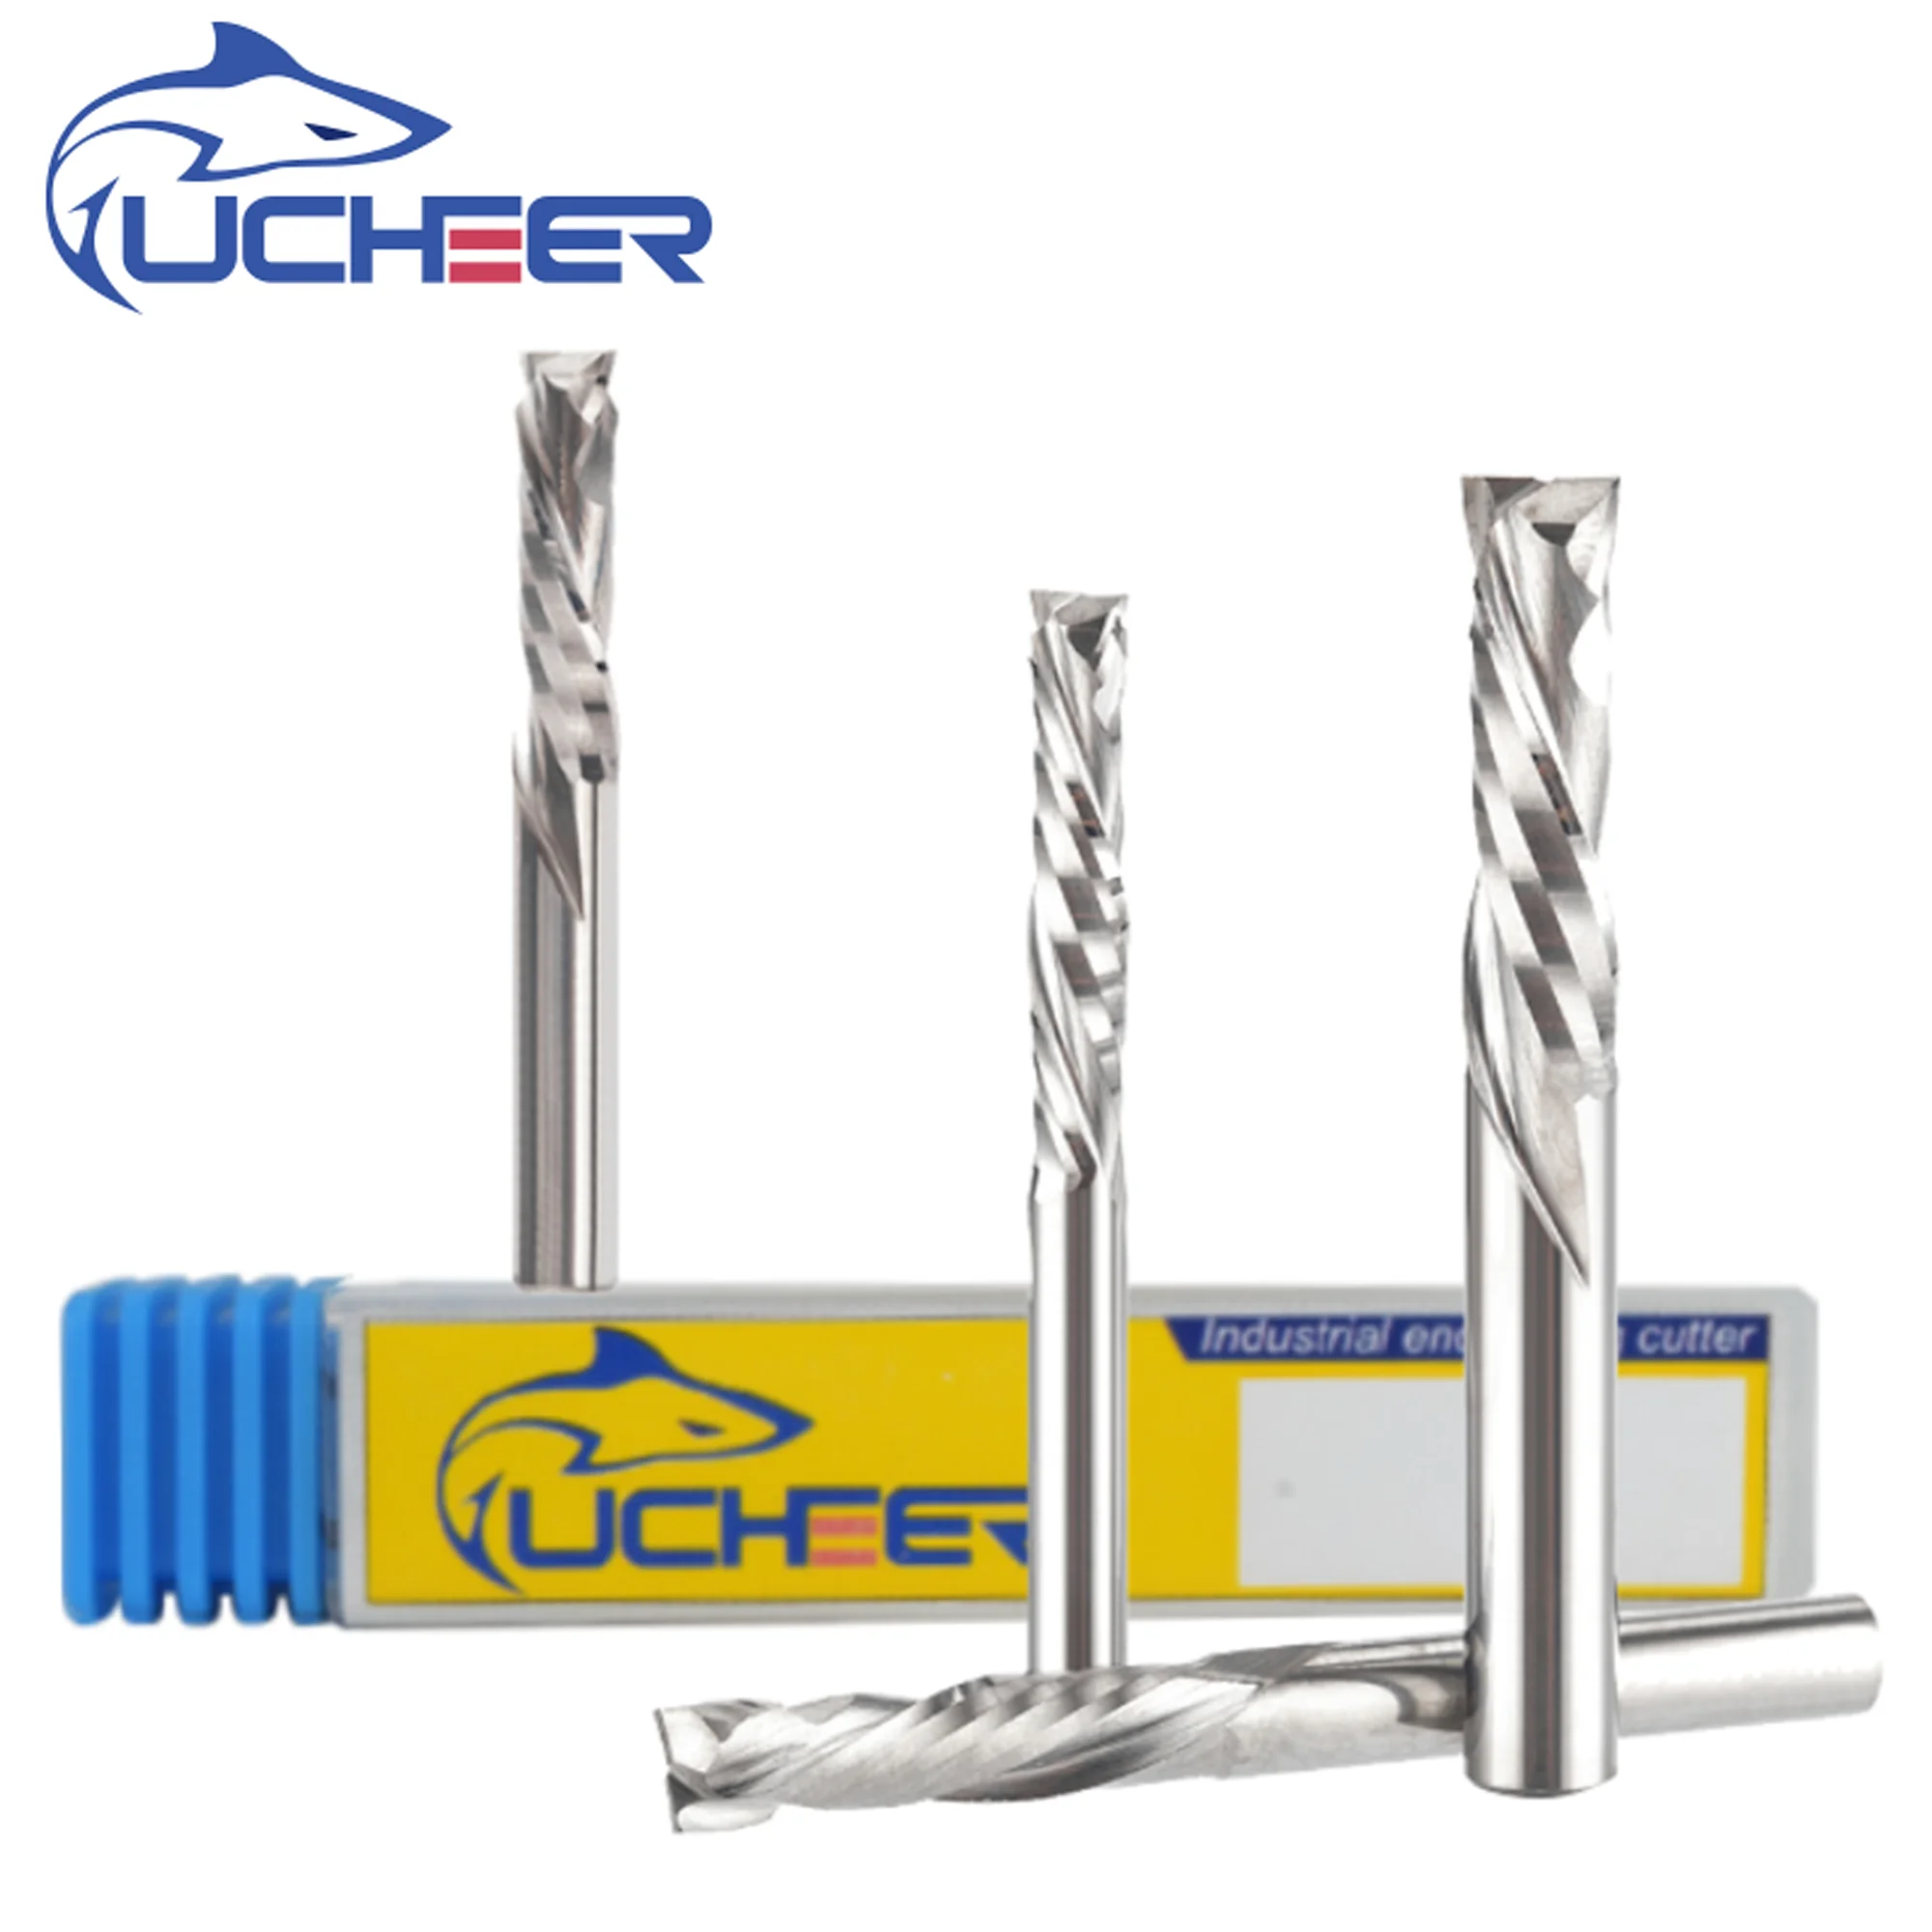 

UCHEER 2 flutes 3.175/4/5/6/8mm Compression end milling cutter cnc tool for MDF Clamp Board Woodworking